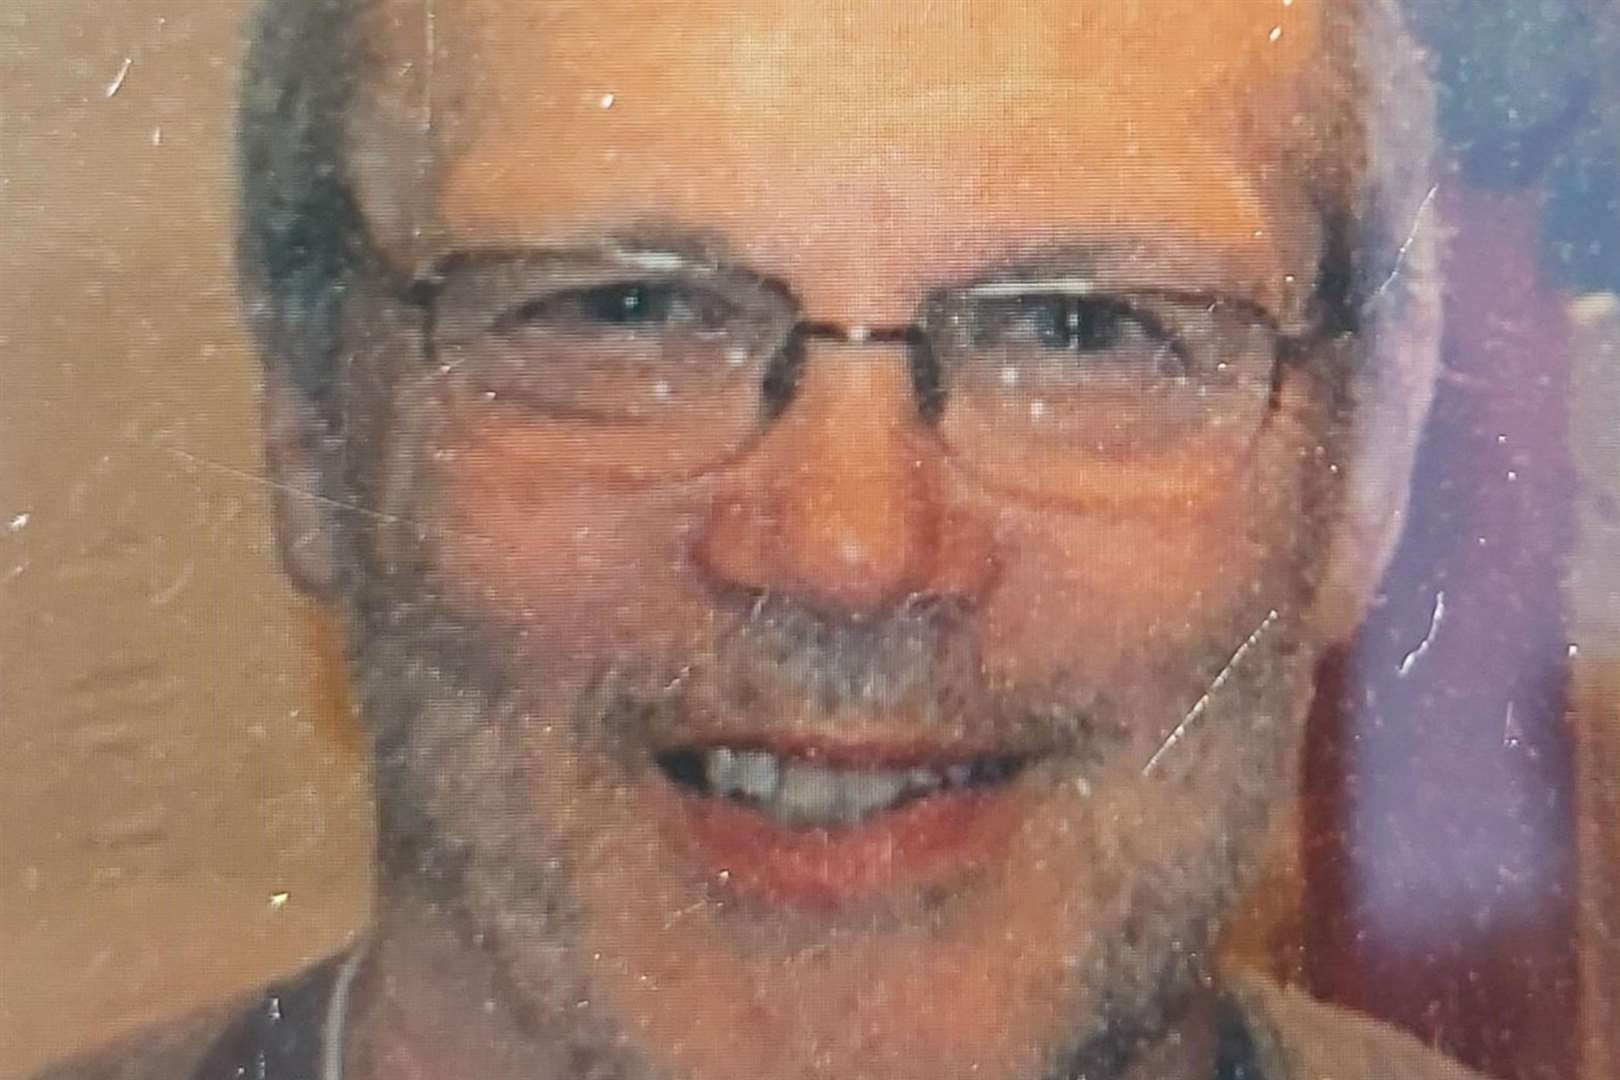 The body of Wayne Leppard was found earlier this week after he went missing. Photo: Kent Police